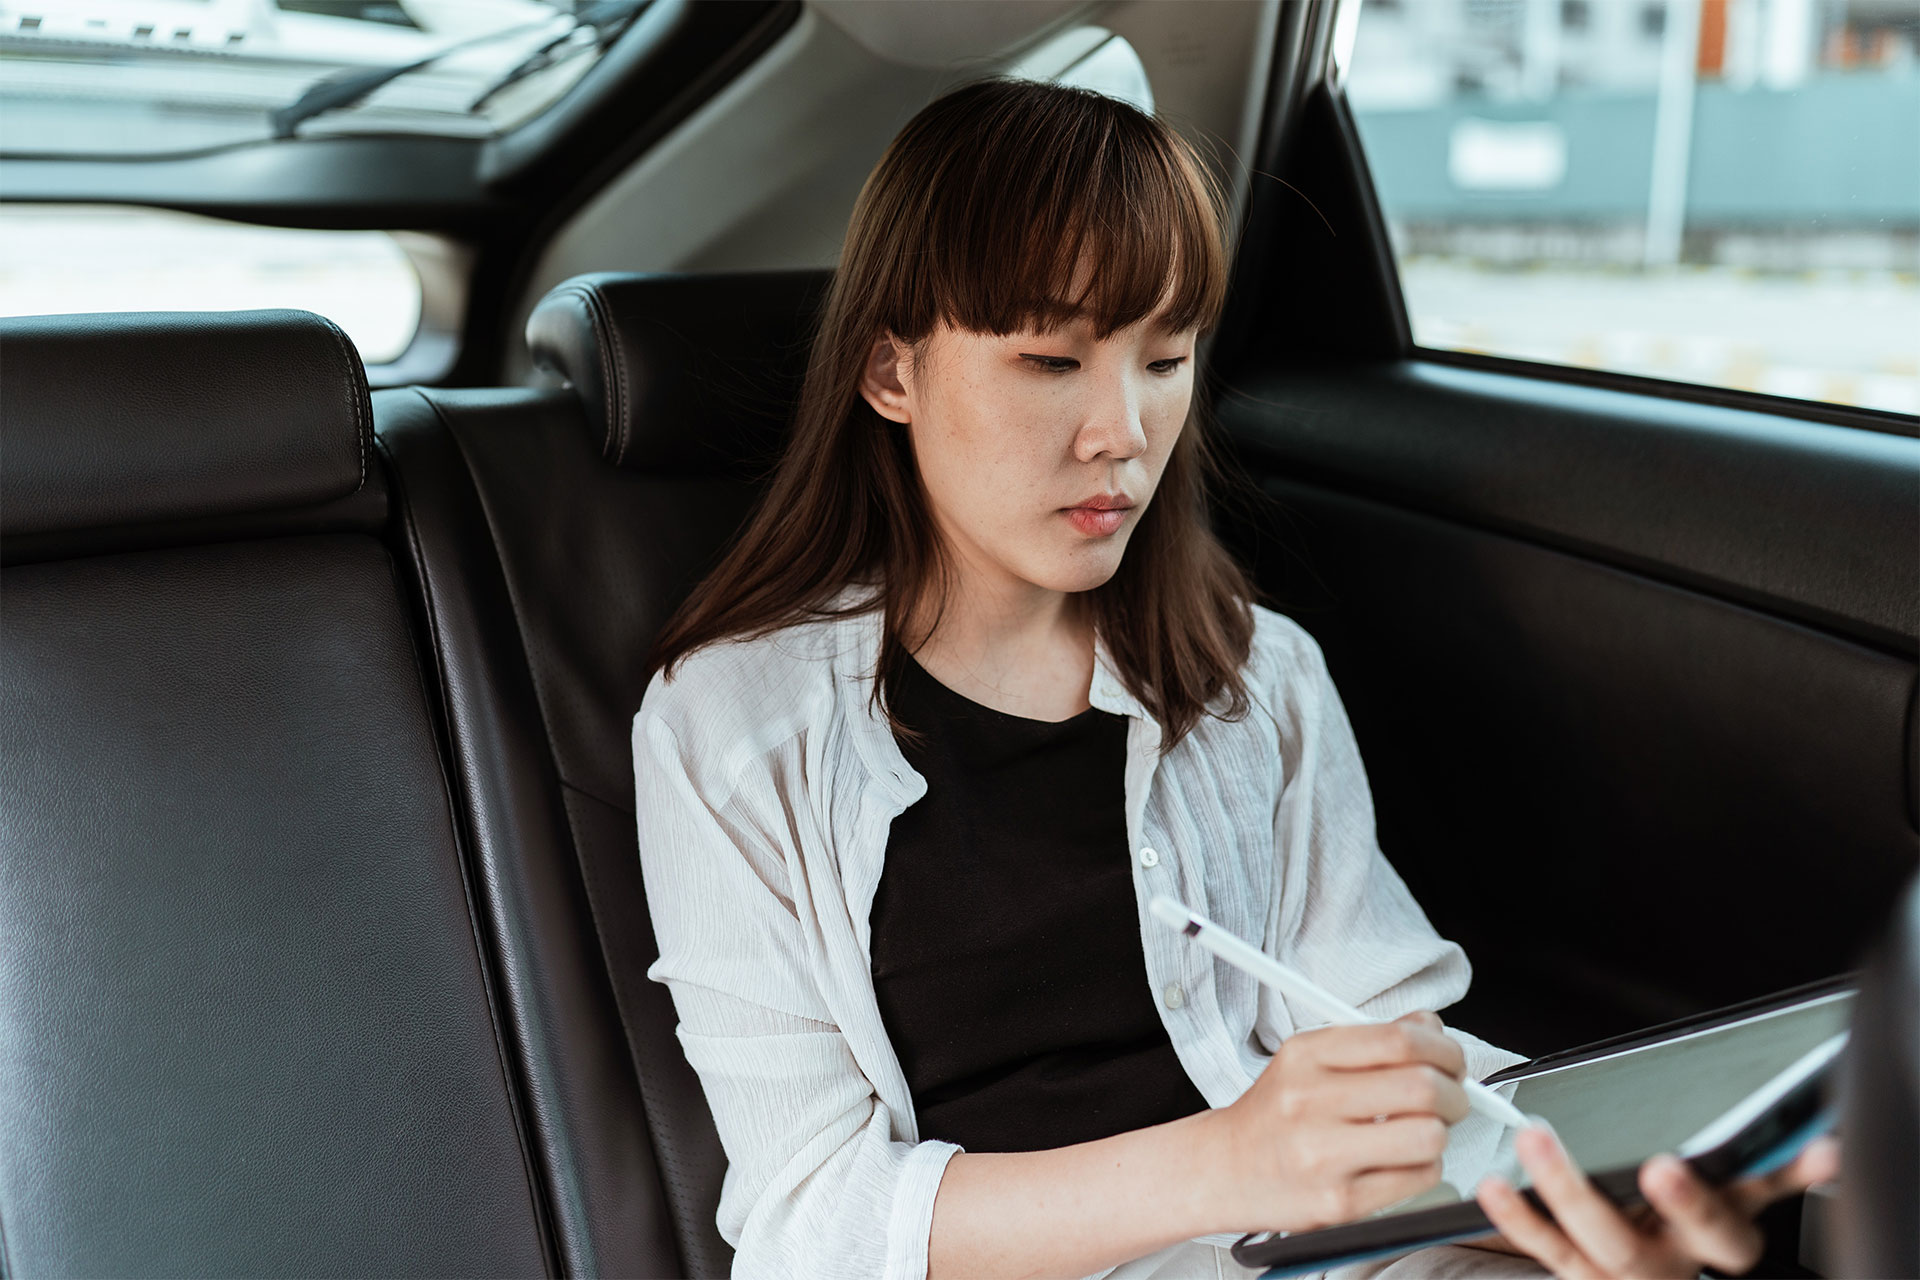 Woman signs something on a tablet while sitting in a car